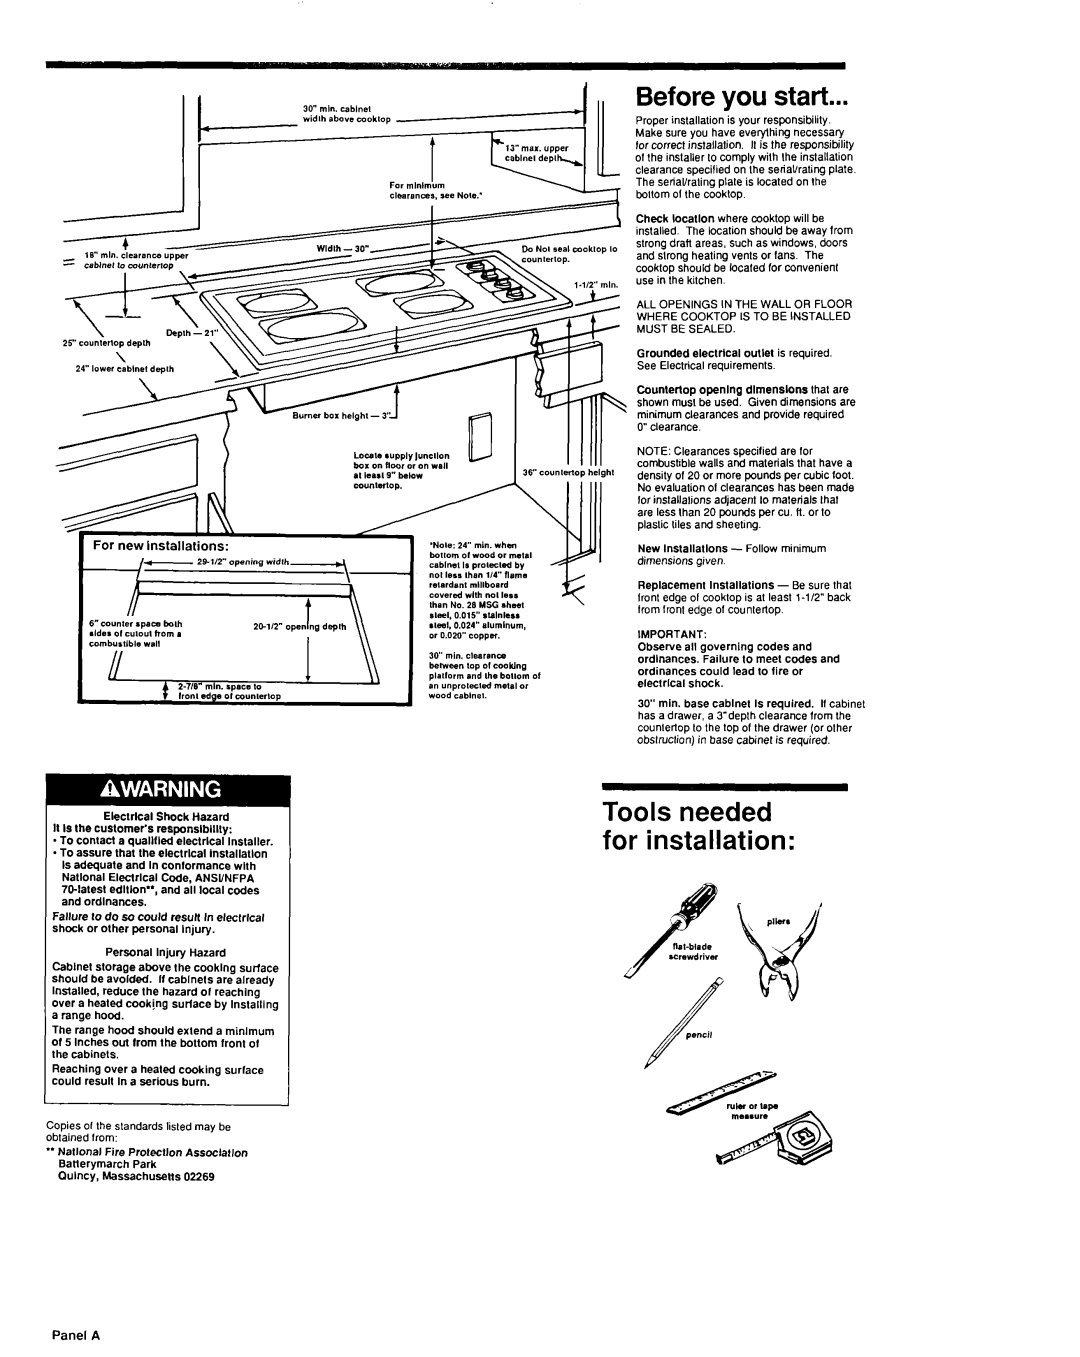 KitchenAid 3181199 Before you start, Tools needed for installation, For new Installations, Panel A 